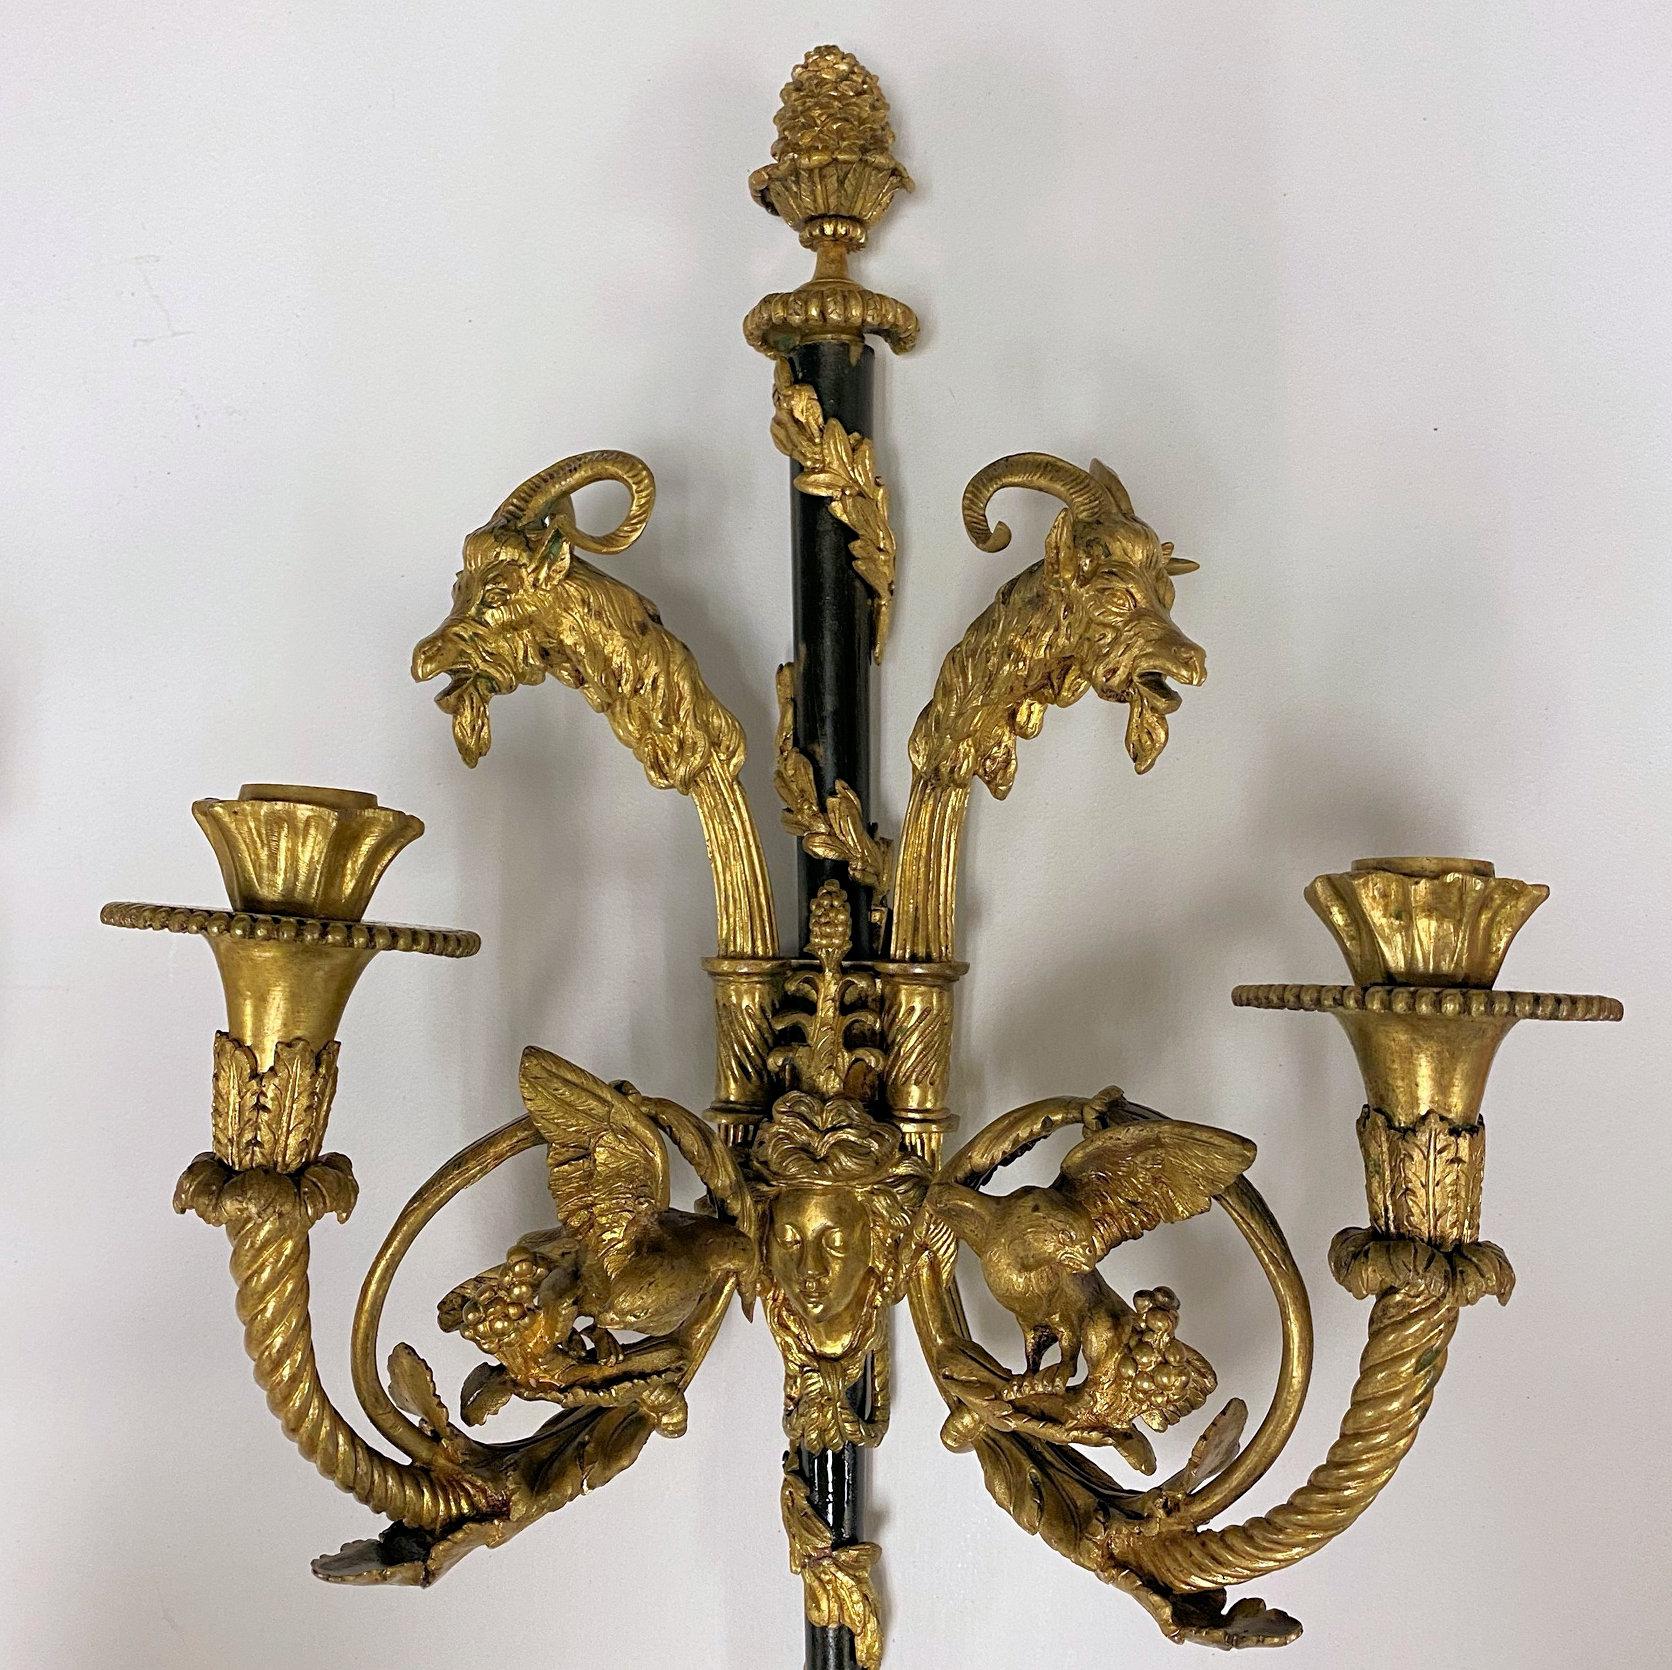 pair of French 19 century Louis XVI Style Two-Light Ormolu Bronze Sconces with Goat head motif